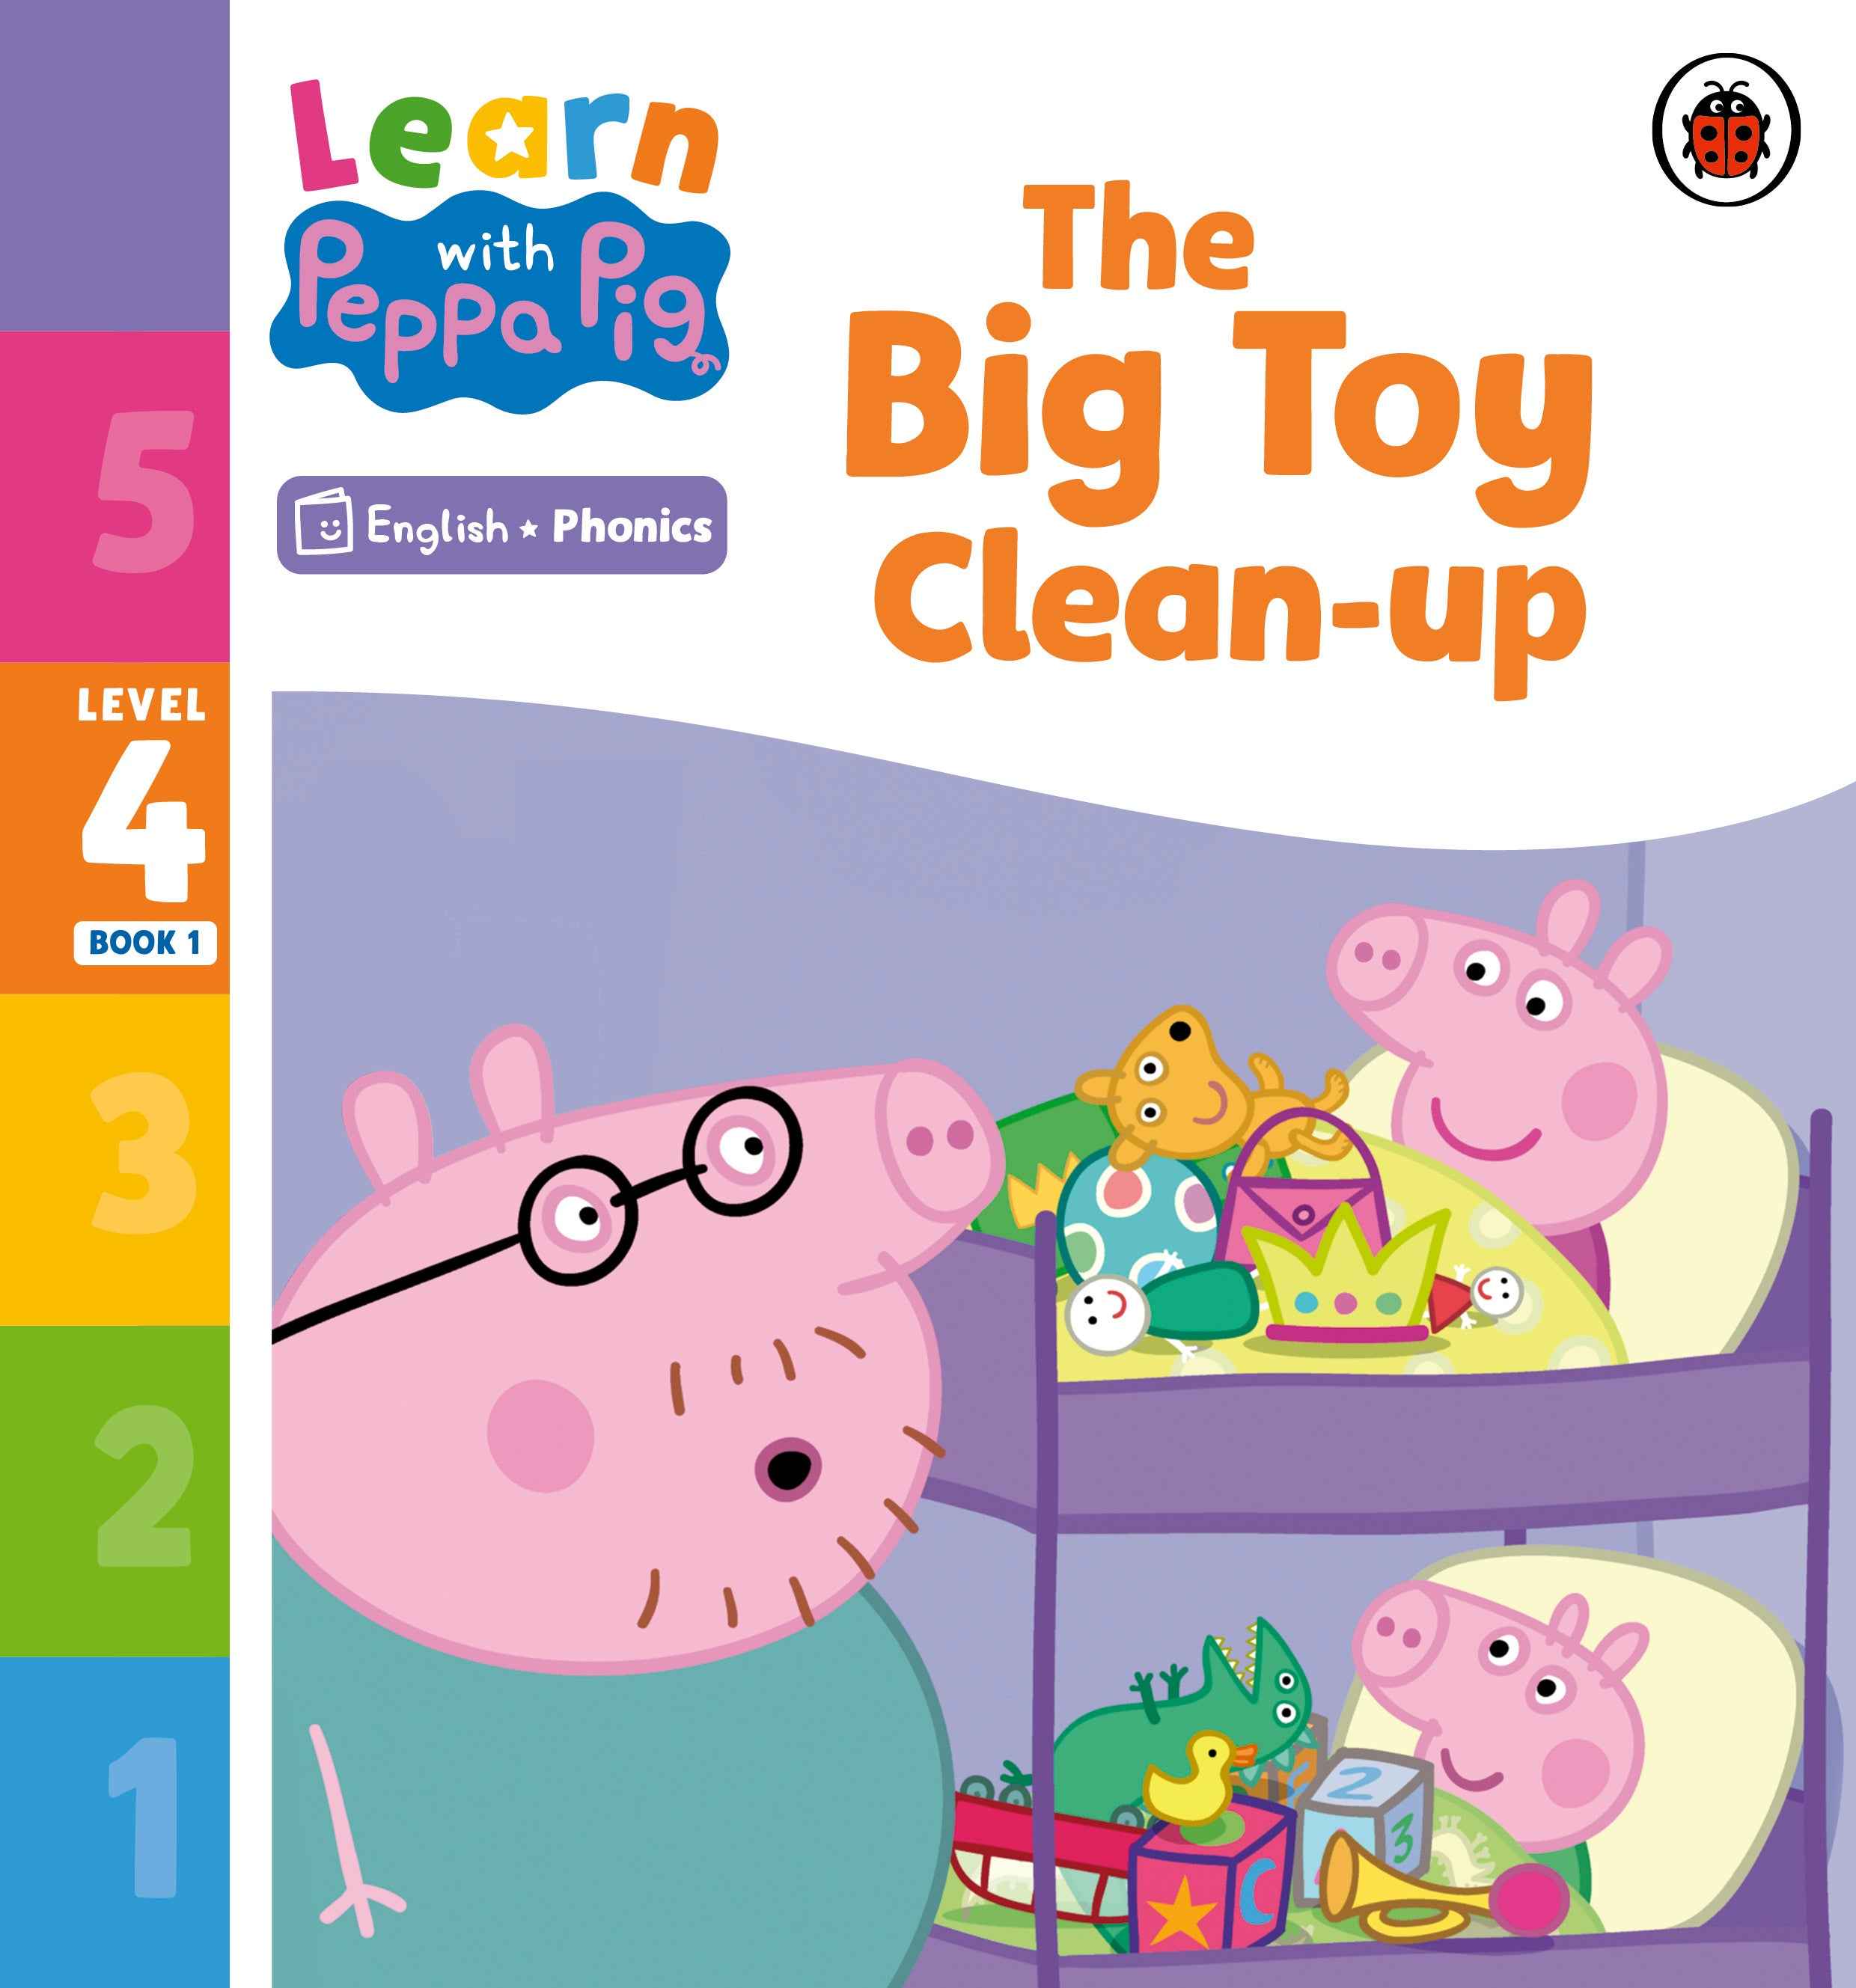 The Big Toy Clean-up